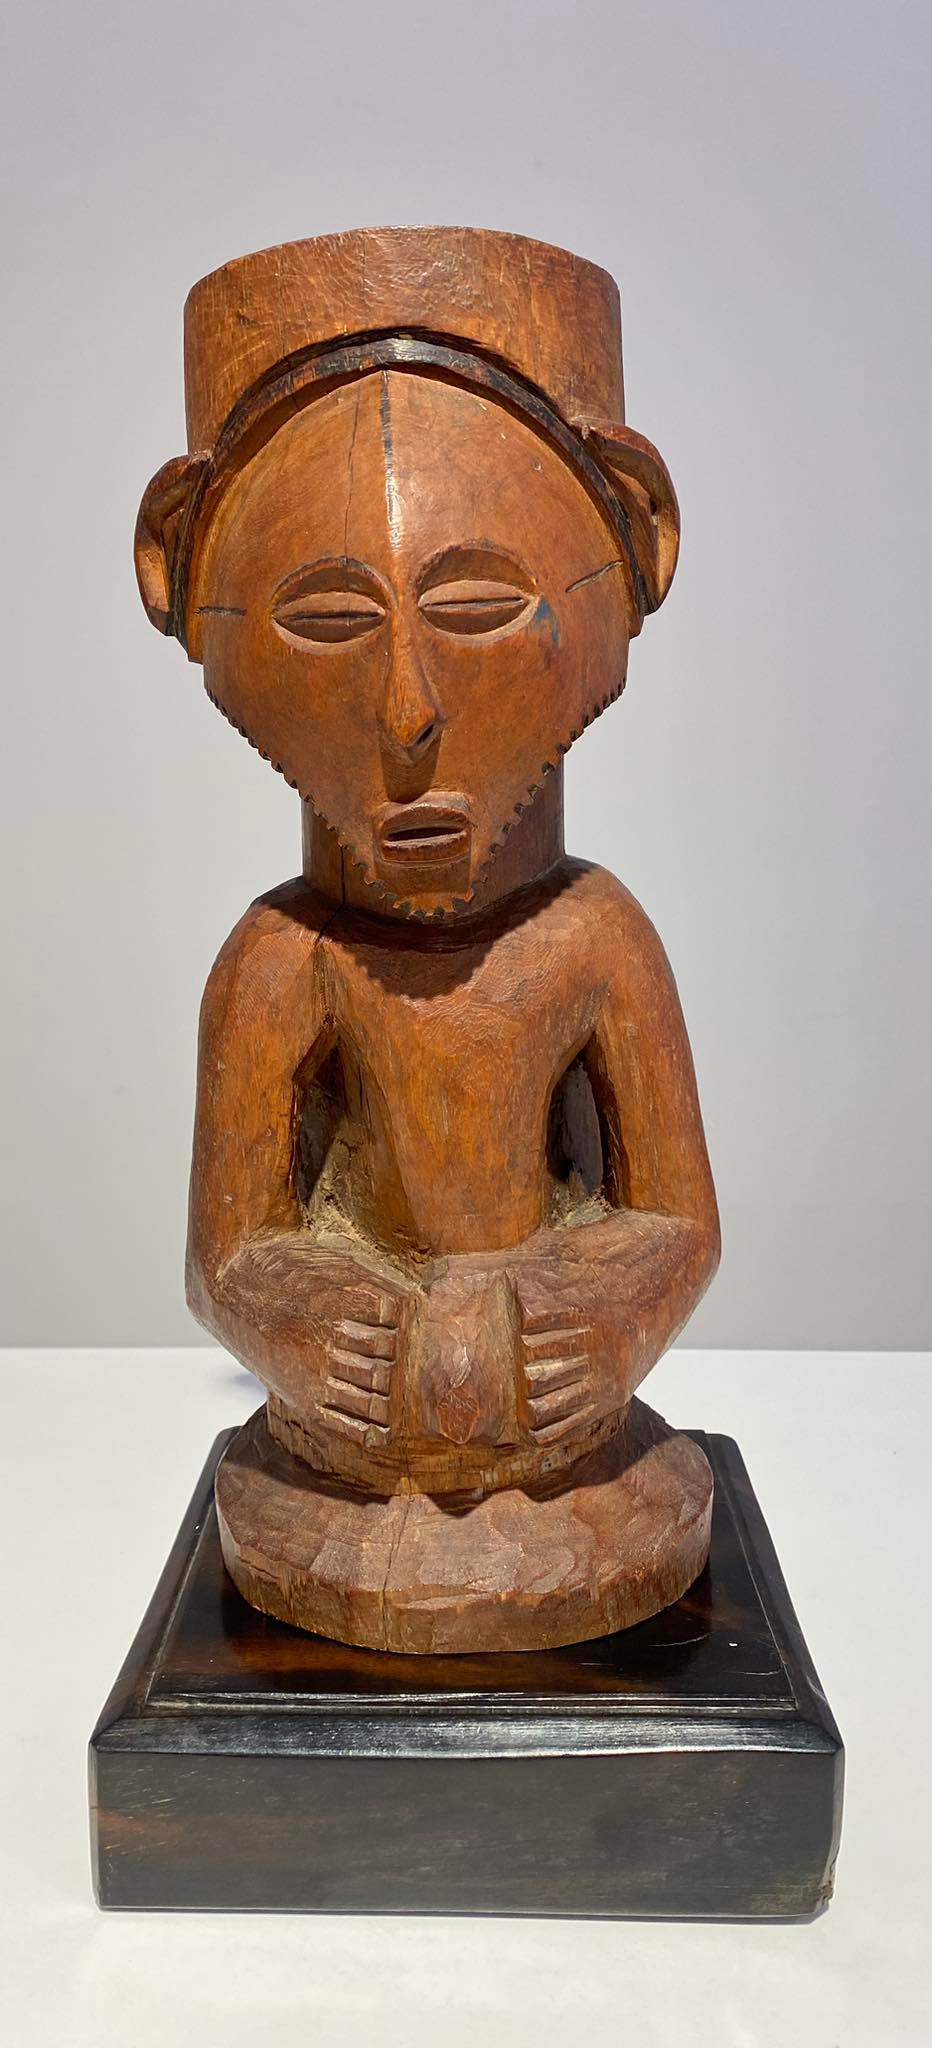 Nicely carved Kusu / Congo statue with beautiful face / almond shaped eyes and triangular face with beard. Top of the head is a big hole to charche the powerful statue and has patina of age and use. 
This statue, used for worship, is most likely a